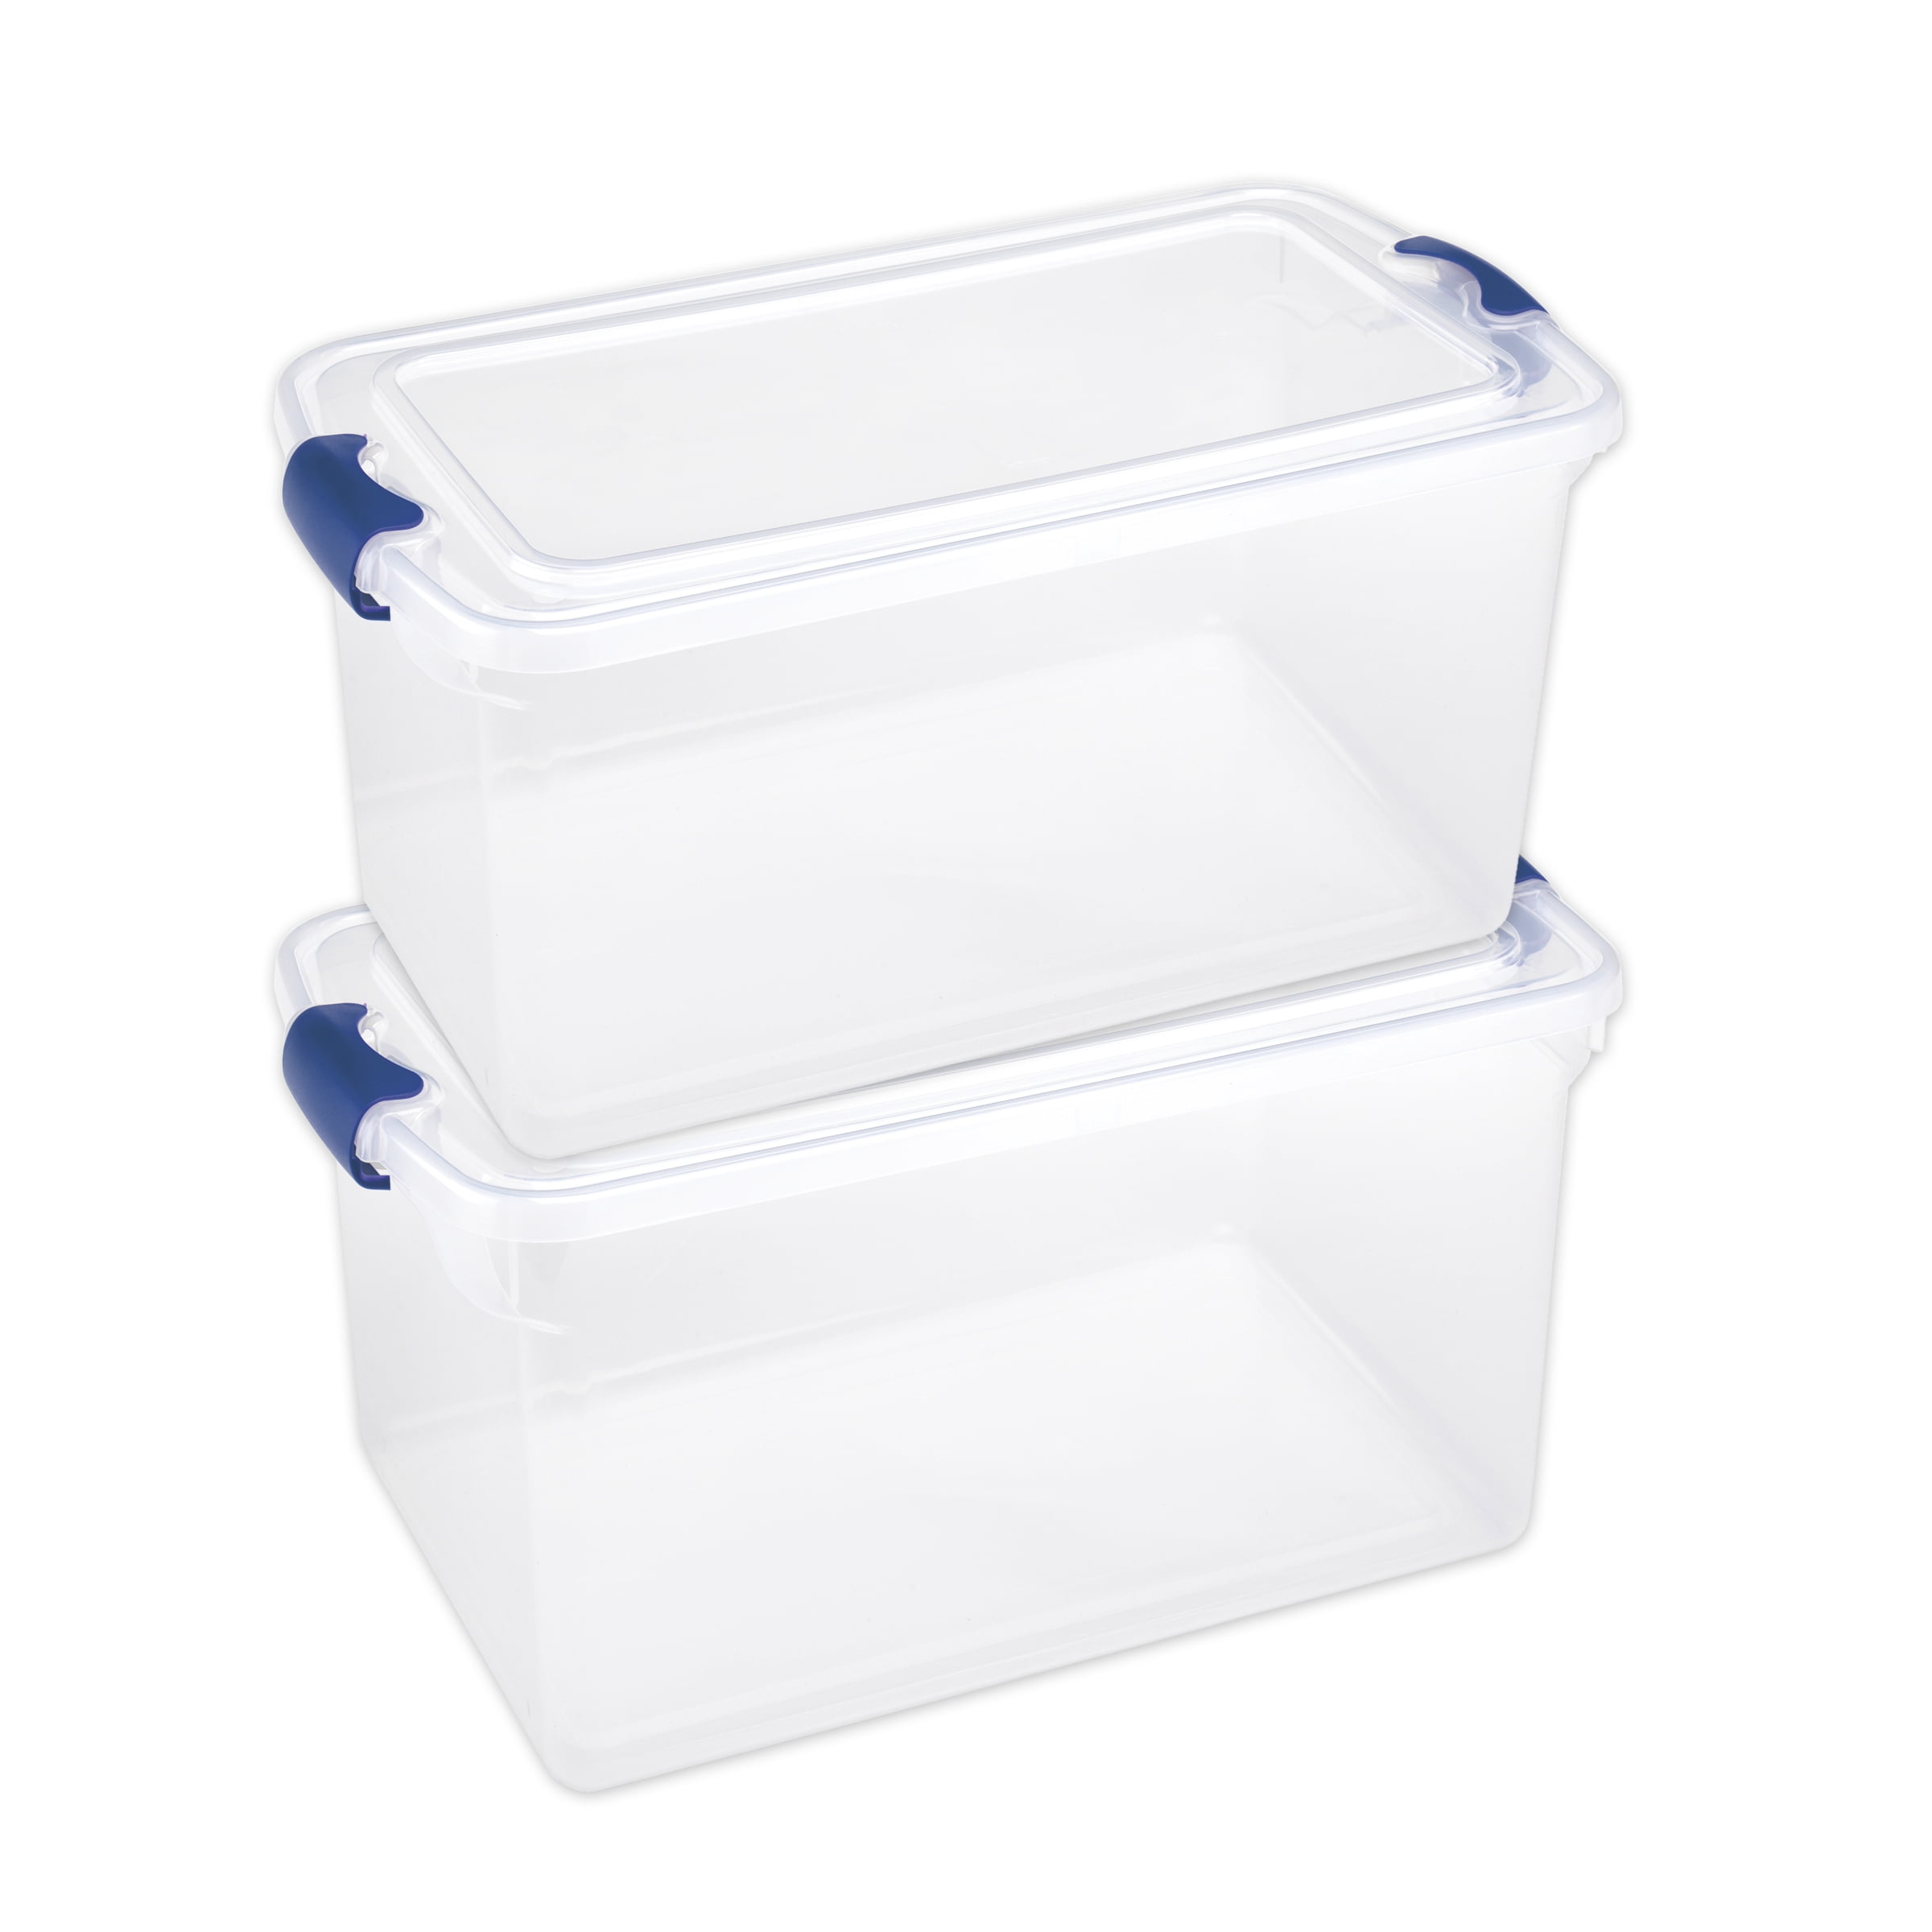 Homz Multipurpose 66 Quart Clear Storage Container Tote Bins with Secure  Latching Lids for Home or Office Organization, (2 Pack)